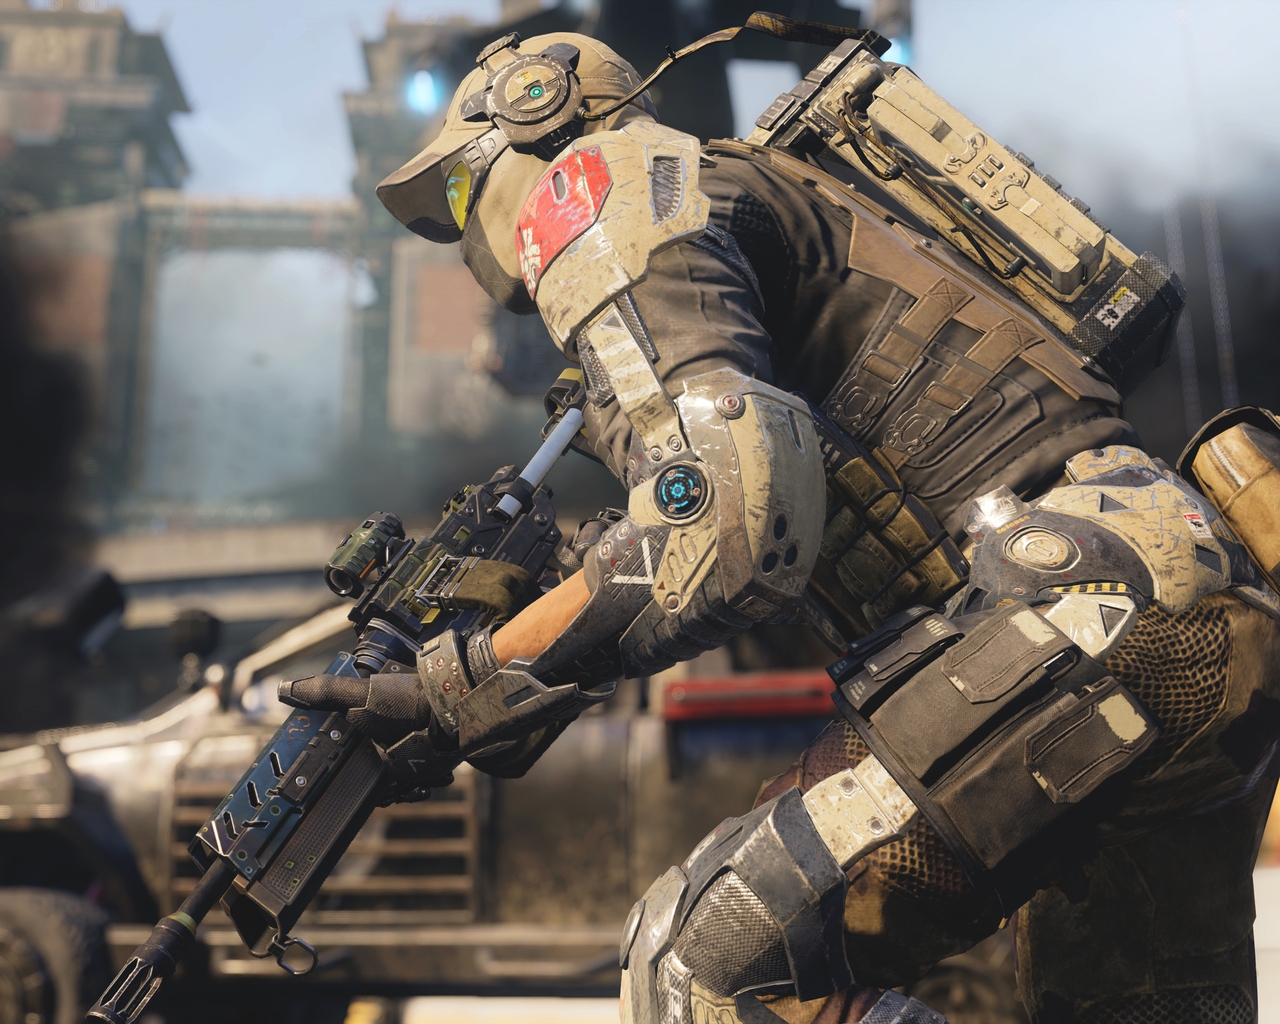 Call of Duty Black Ops III for 1280 x 1024 resolution